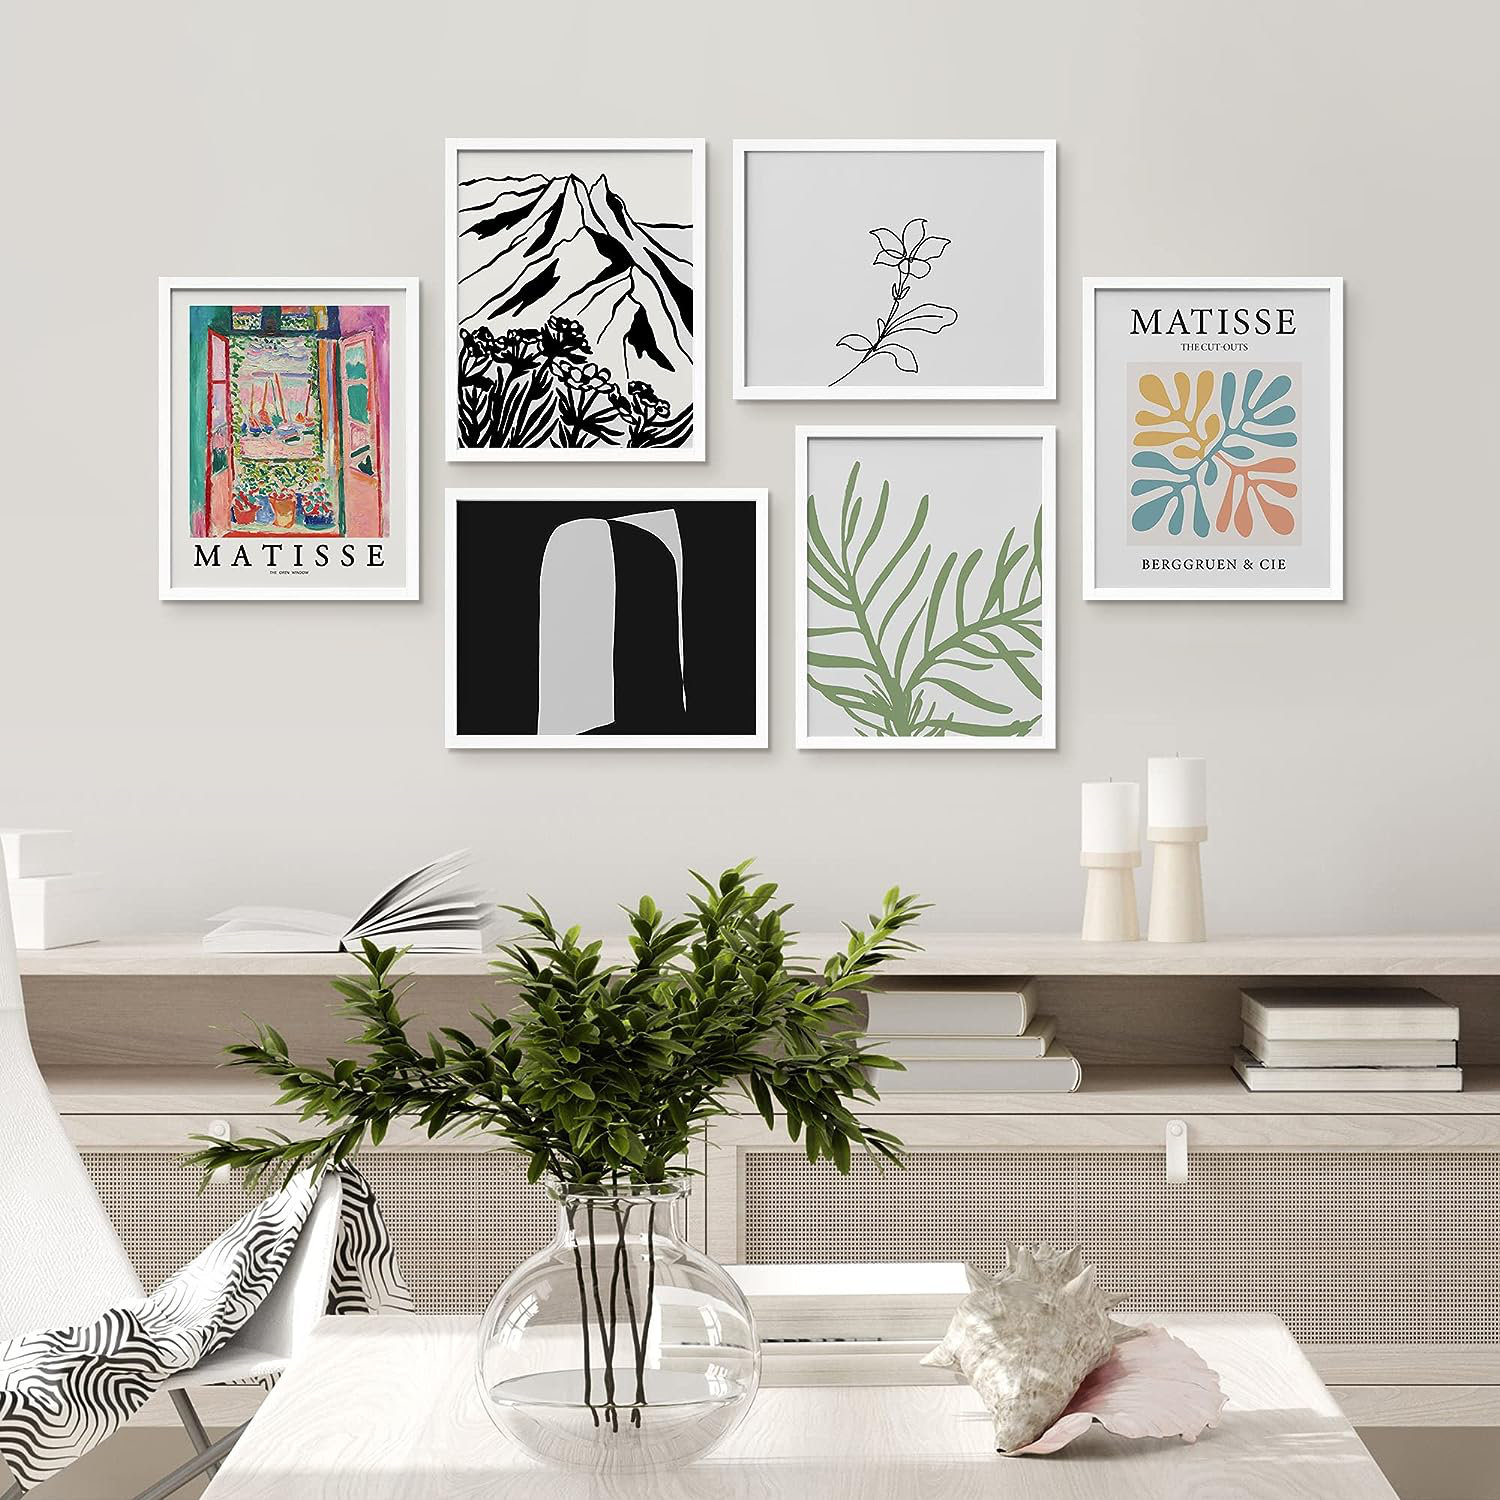 SIGNLEADER Framed Henri Matisse Colorful Plant Wall Art, Set Of Abstract Geometric  Wall Decor Prints, Minimalism Wall Decor For Living Room, Bedroom Framed  Pieces by Henri Matisse Print Wayfair